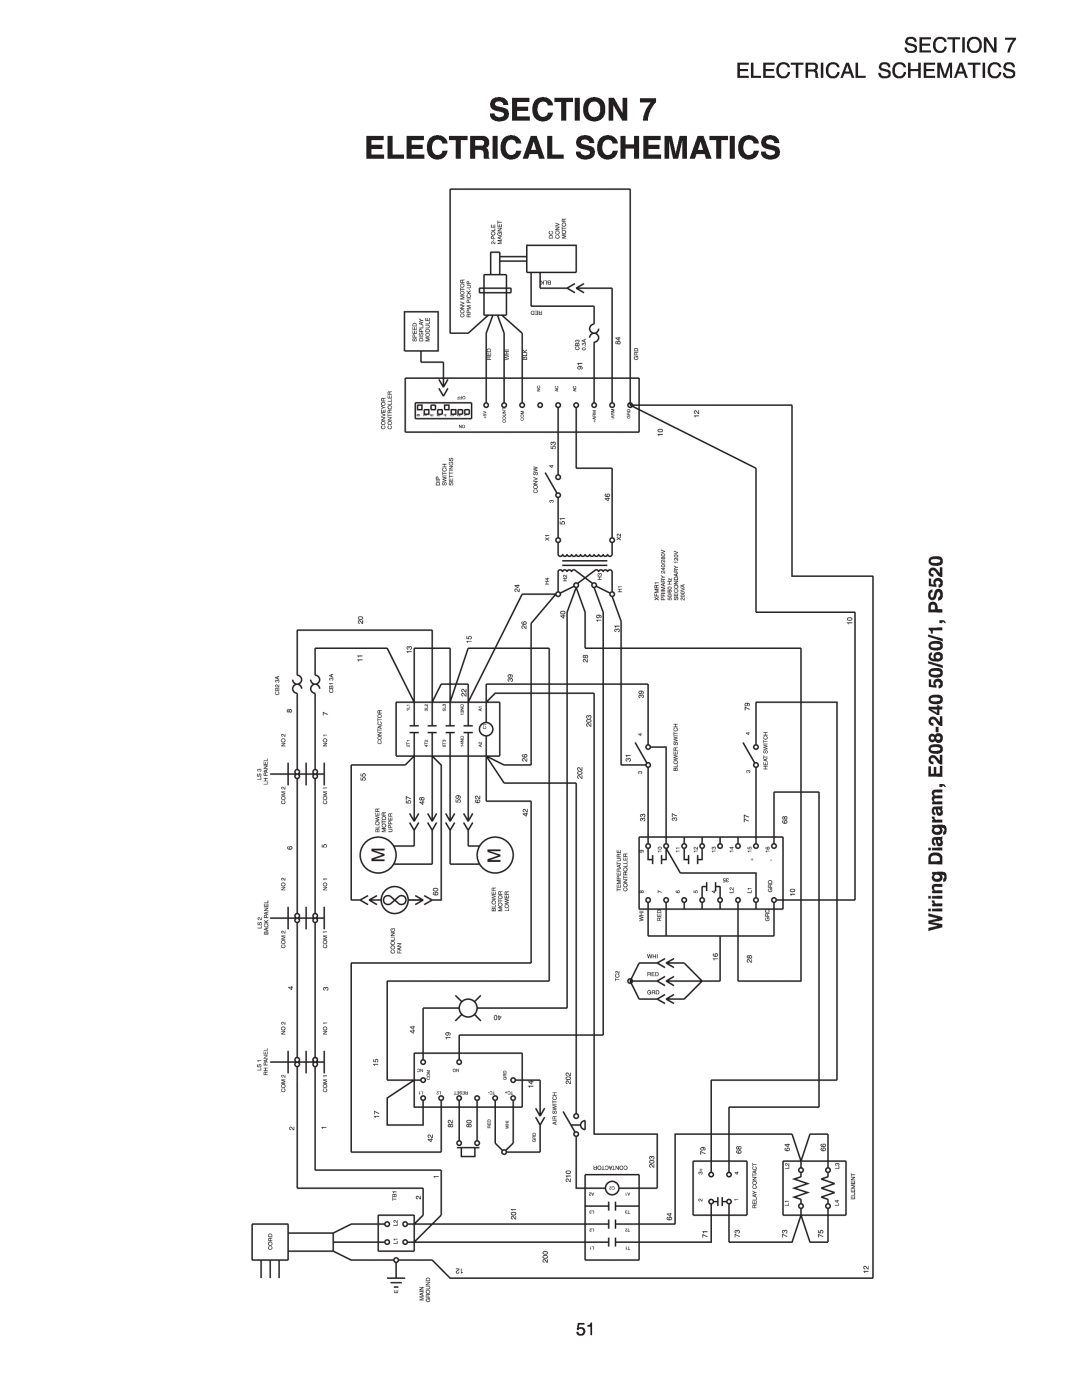 Middleby Marshall installation manual Section Electrical Schematics, Wiring Diagram, E208-24050/60/1, PS520 